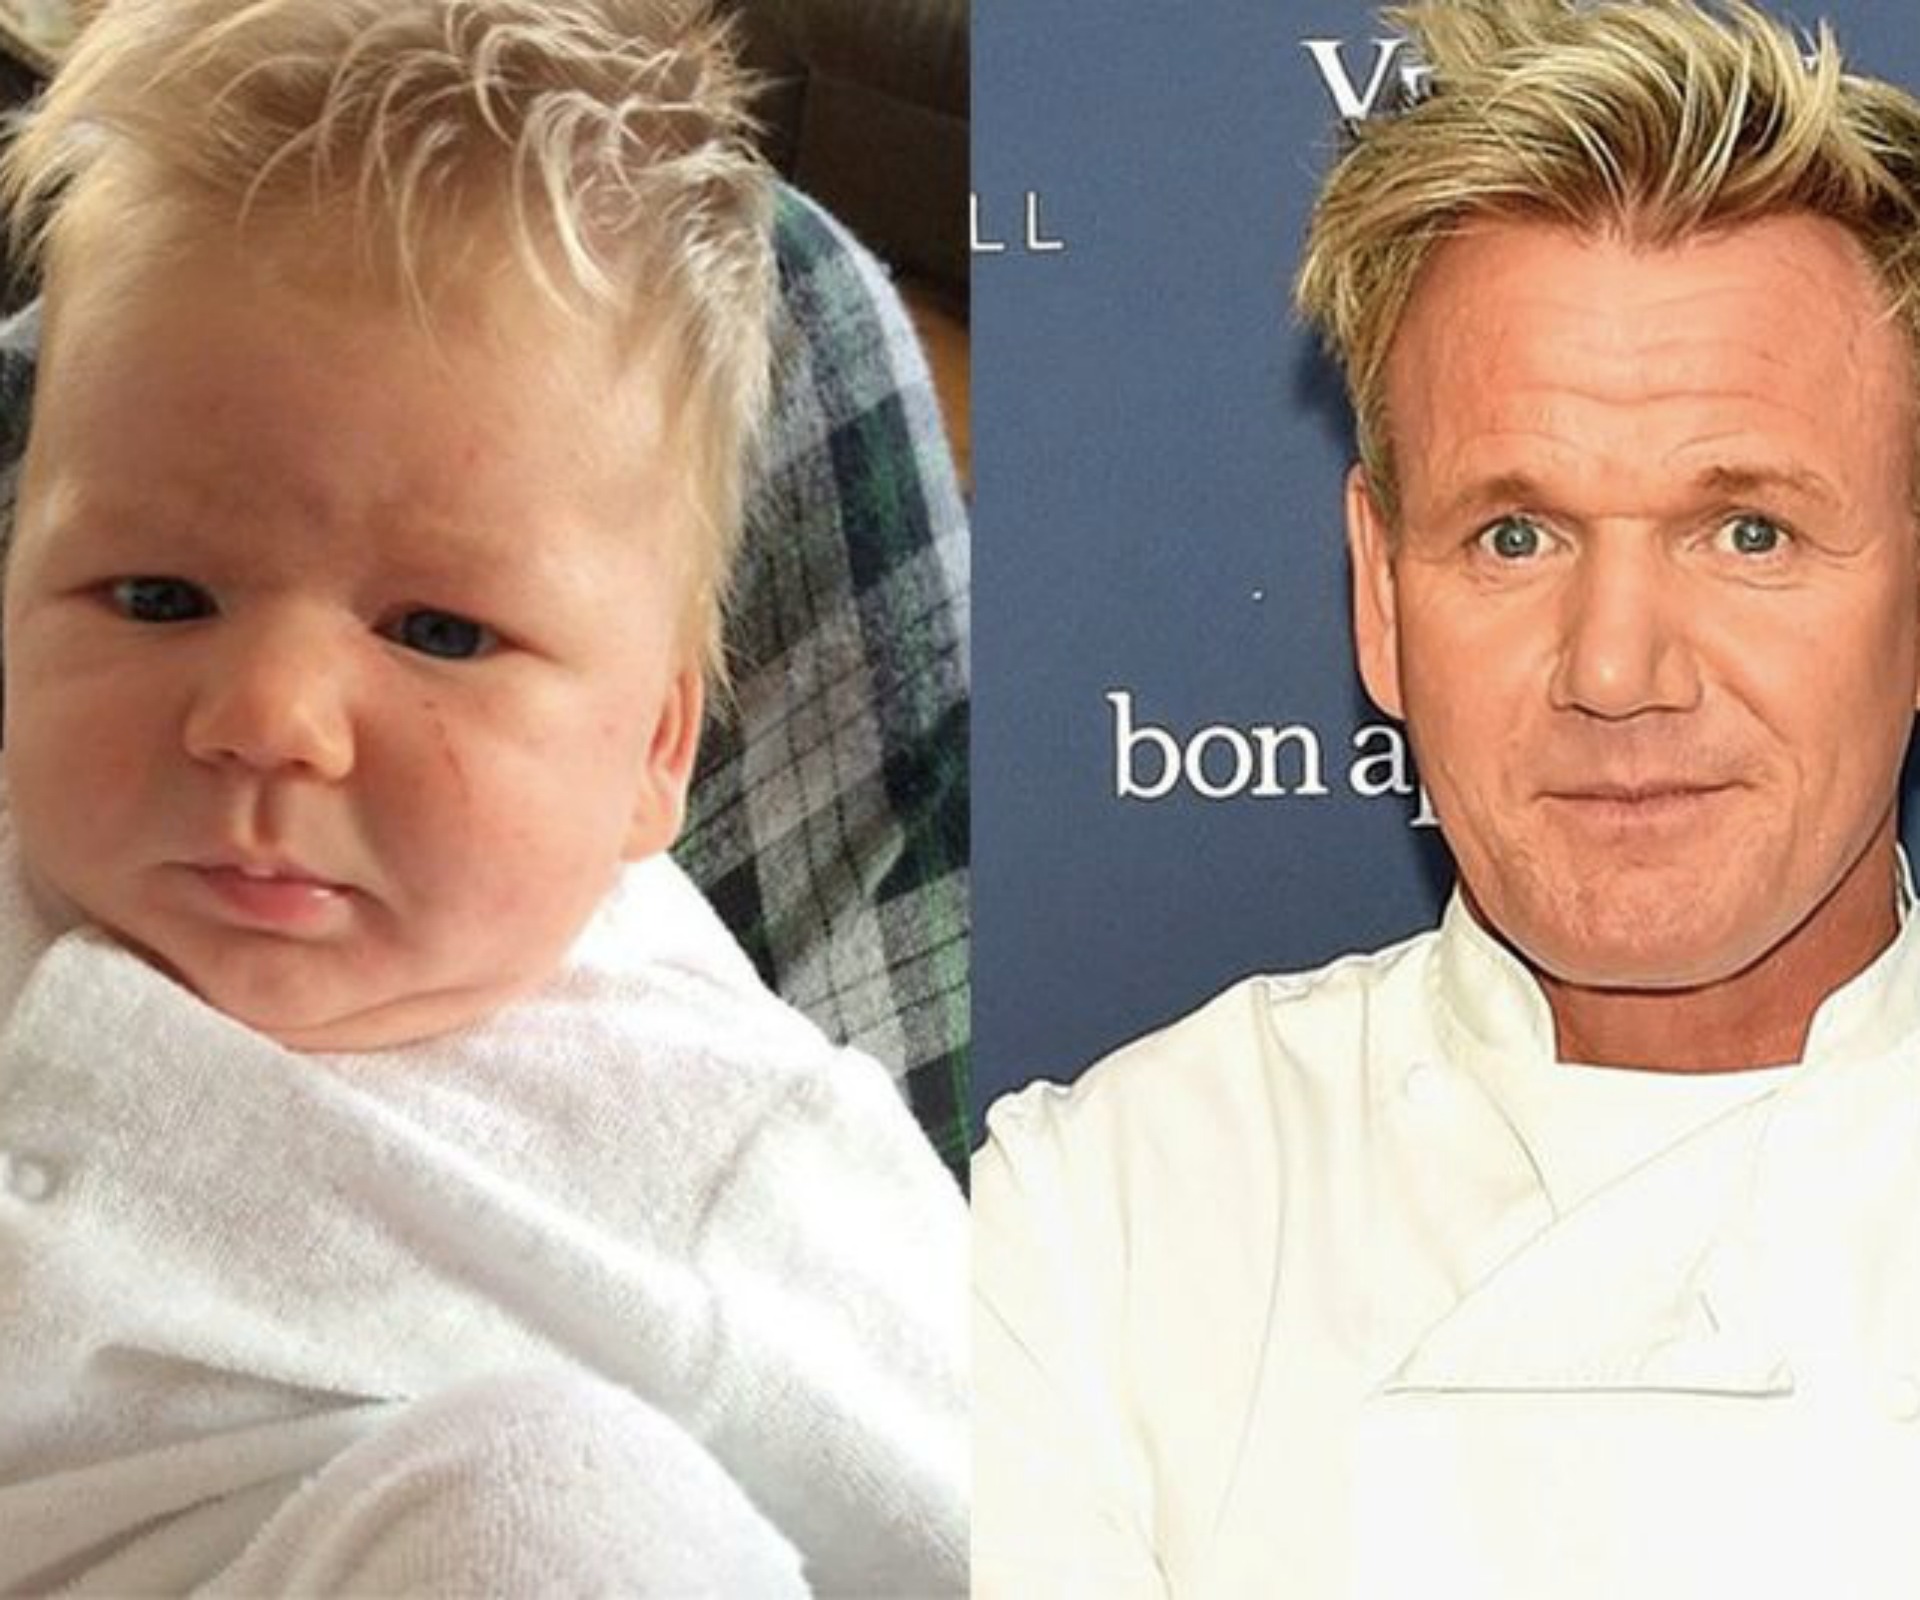 This baby looks so much like Gordon Ramsay